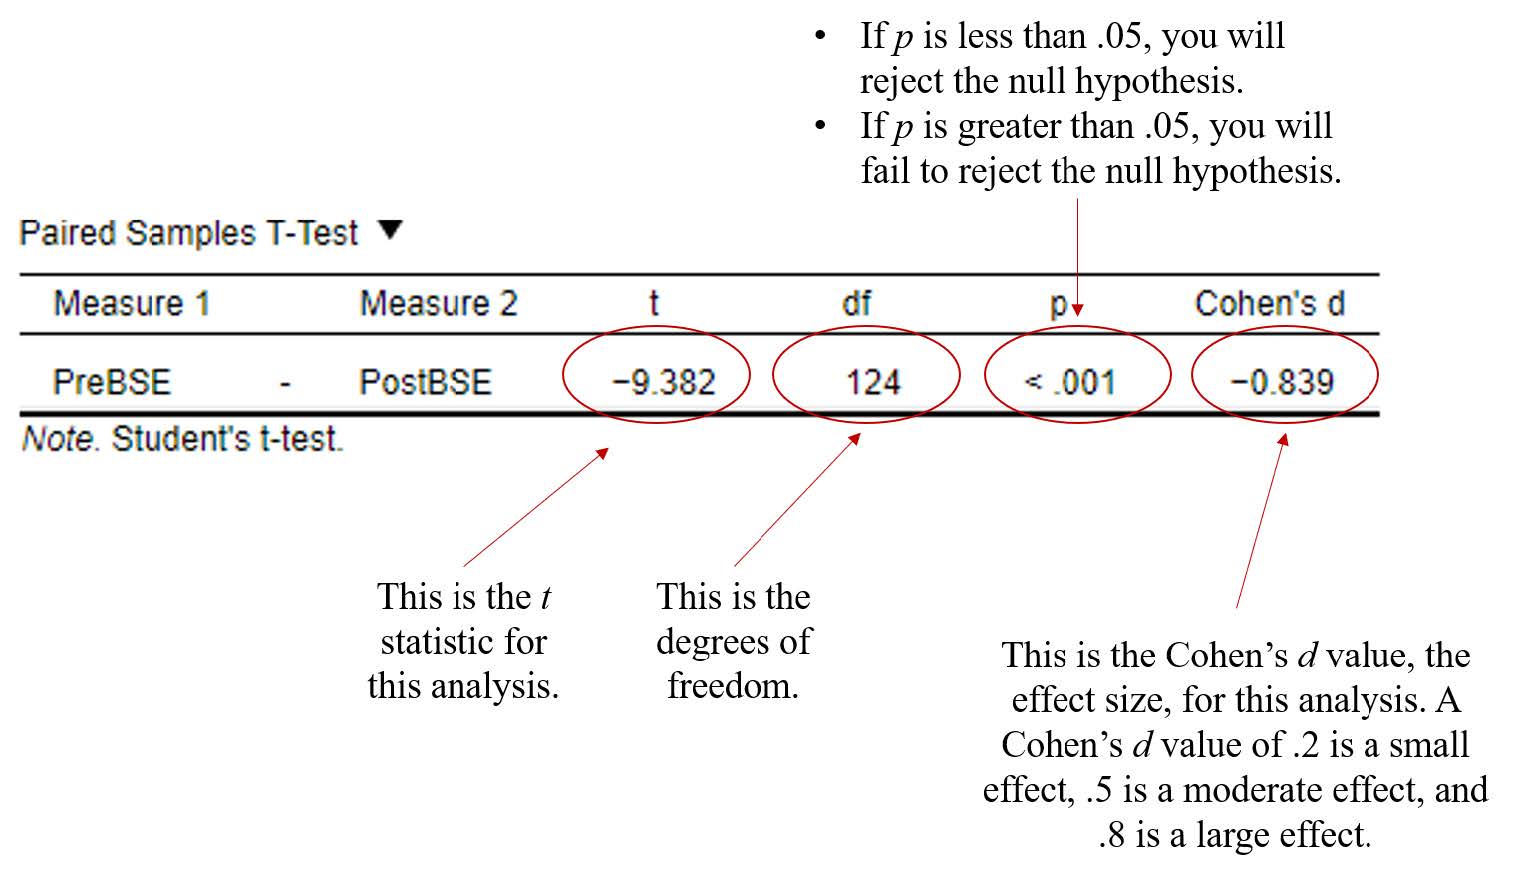 Image of JASP Paired Samples T-Test results table. Table has the t statistic (t), degrees of freedom (df), significance value (p), and effect size (Cohen's d) all circled with red circles and labeled with text. Text included in the image is also included in text.